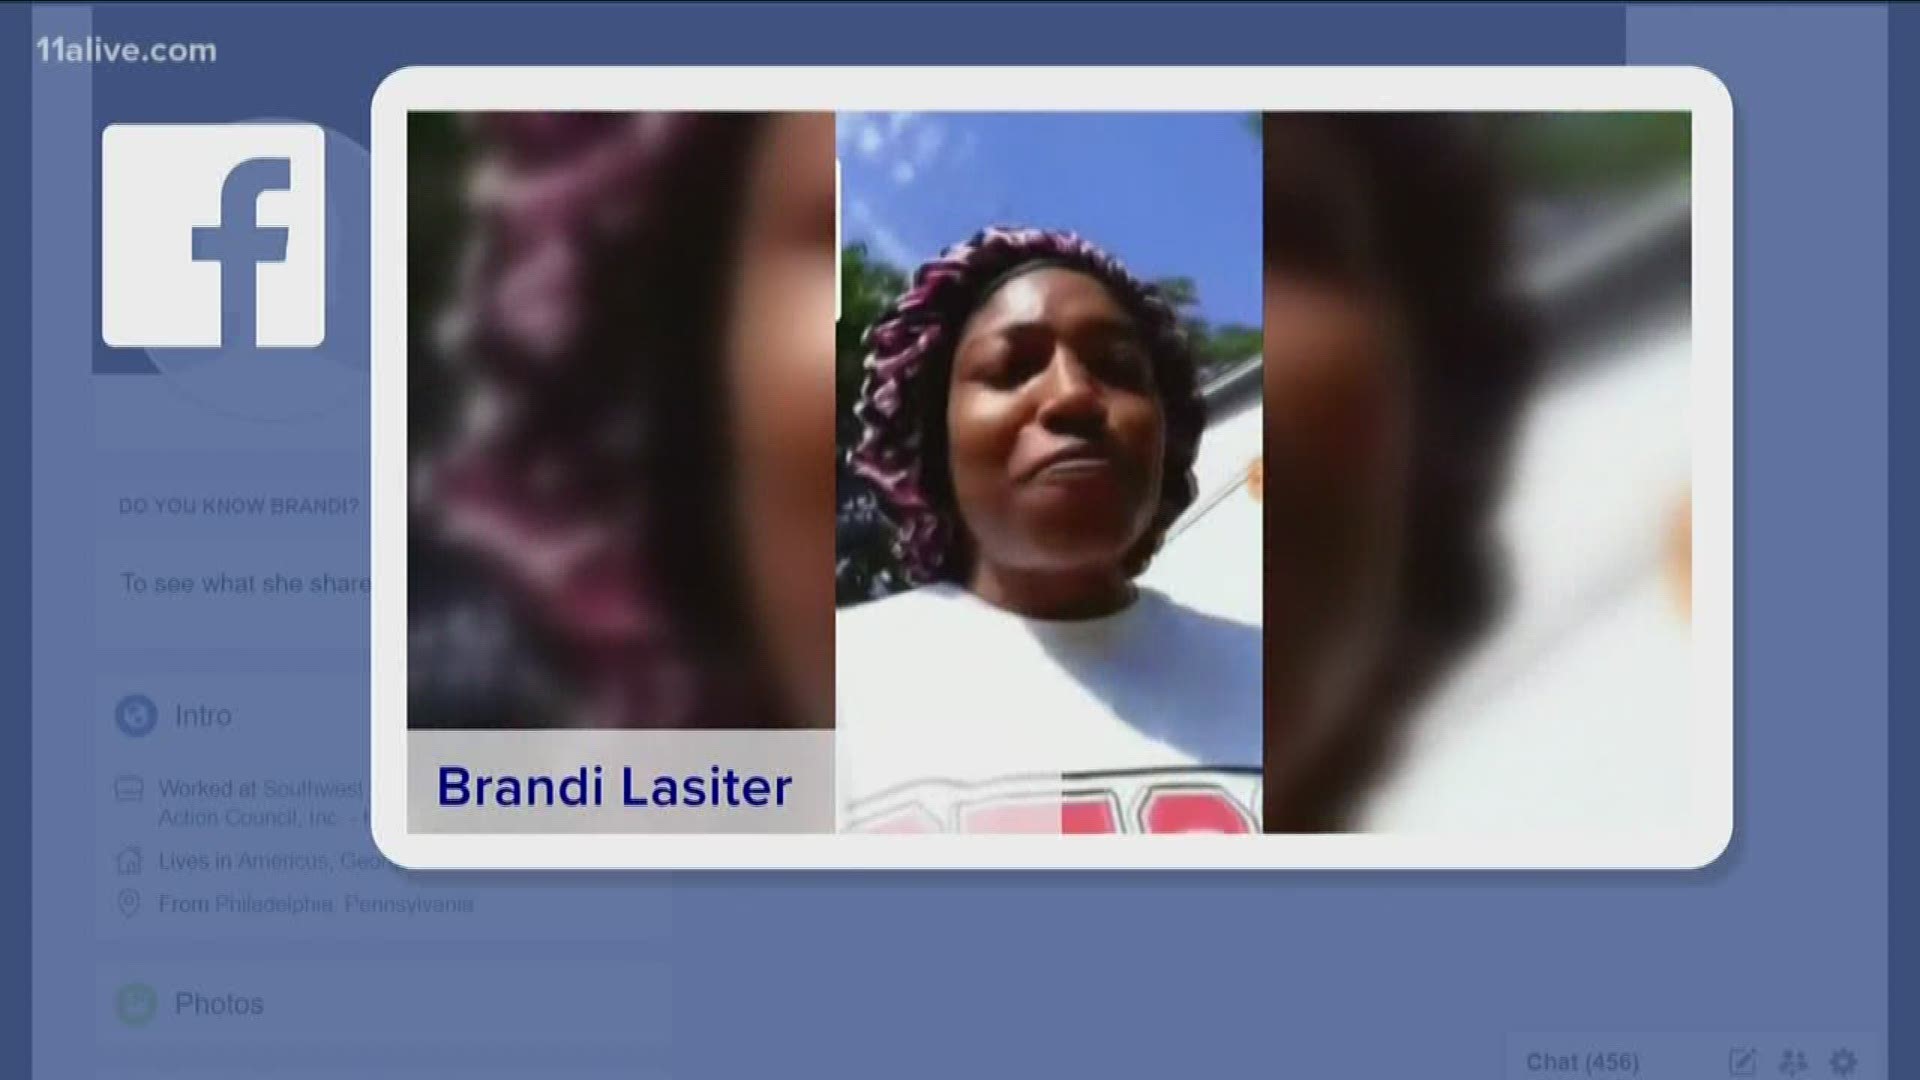 Americus Police confirmed they are investigating the incident involving Brandi Yakeima Lasiter.